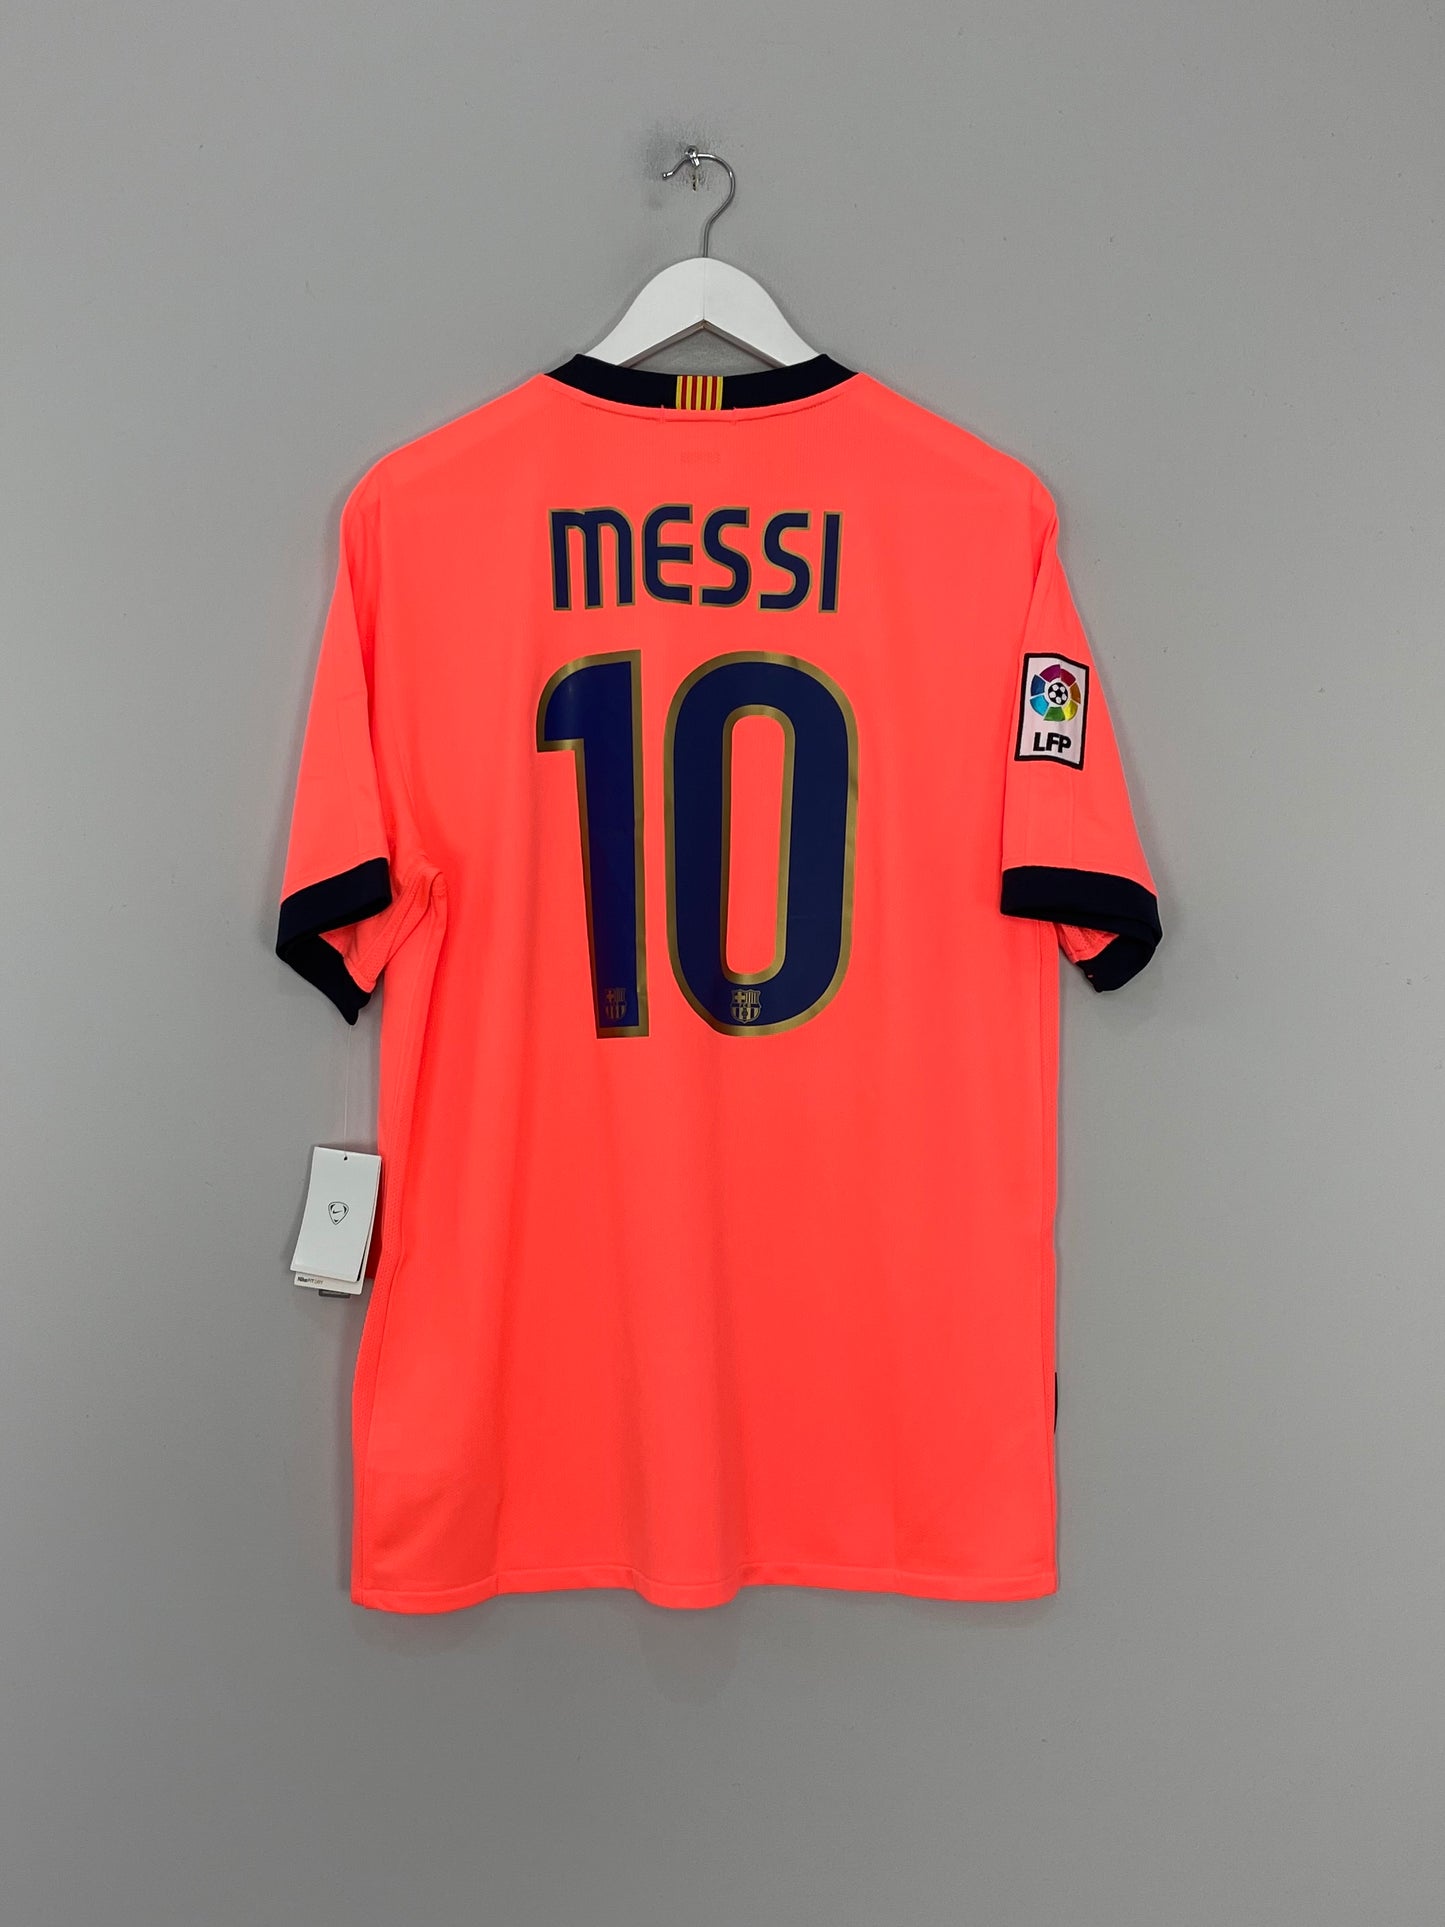 Image of the Barcelona Messi shirt from the 2009/10 season